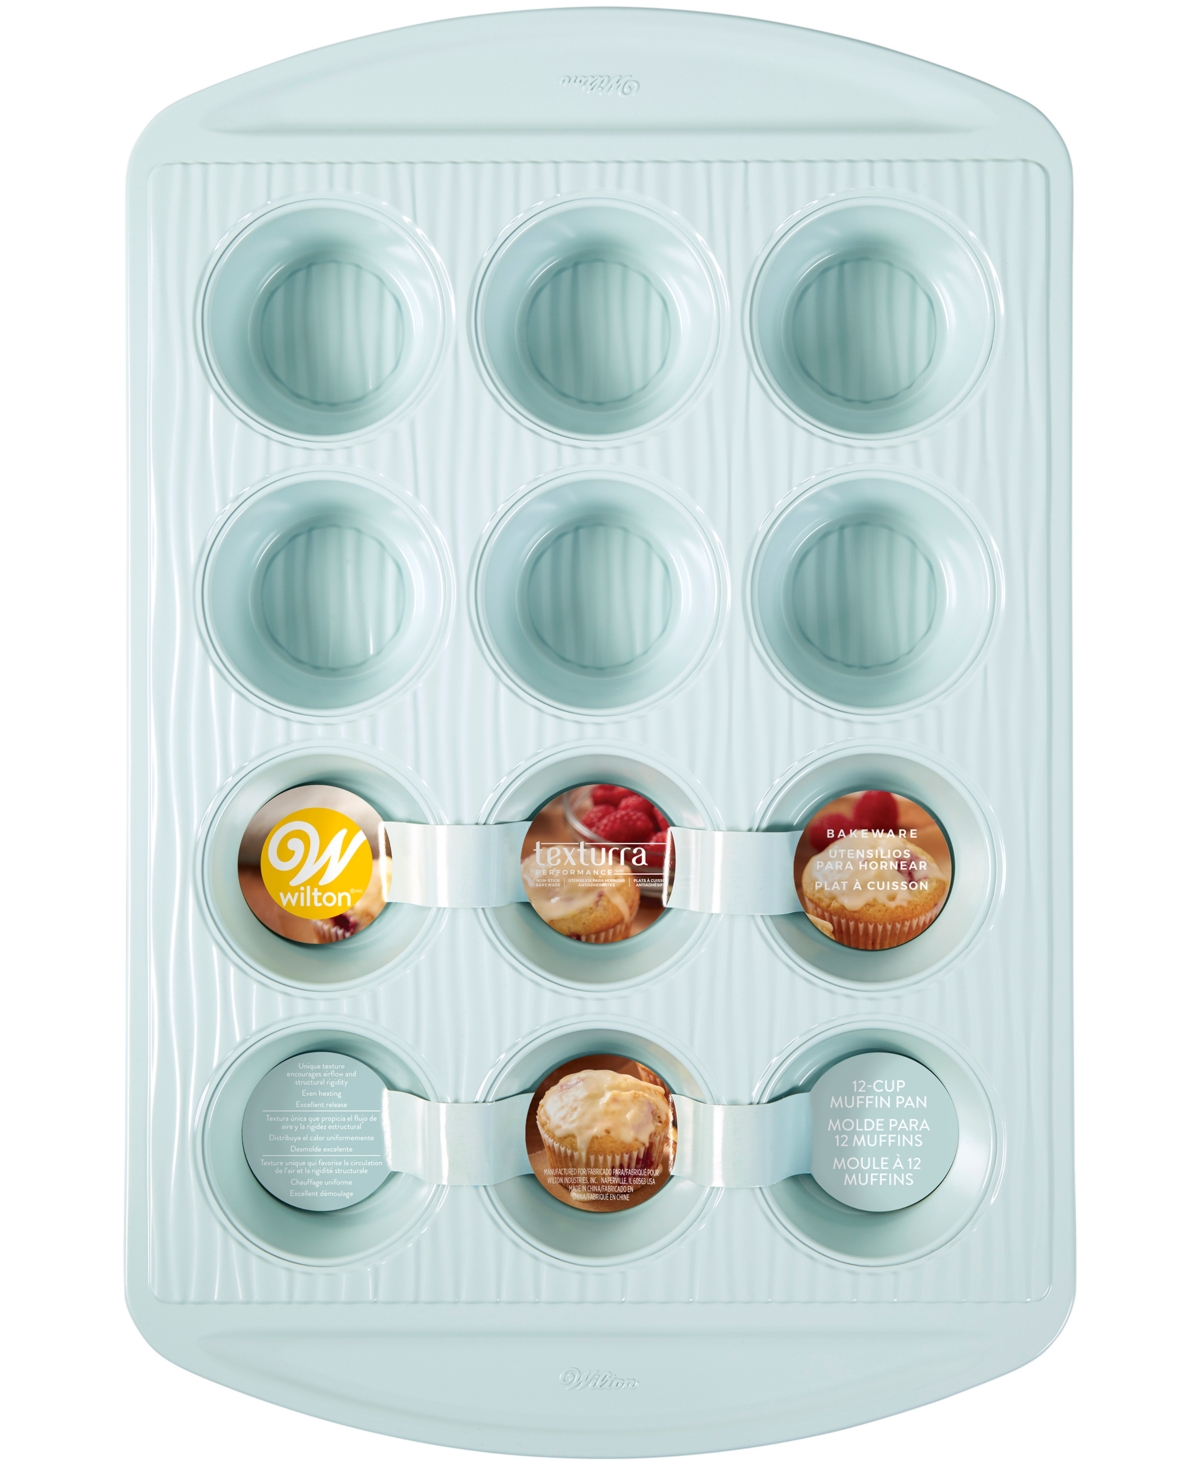 UPC 070896011855 product image for Wilton Texturra Wave 12-Cup Muffin Pan | upcitemdb.com